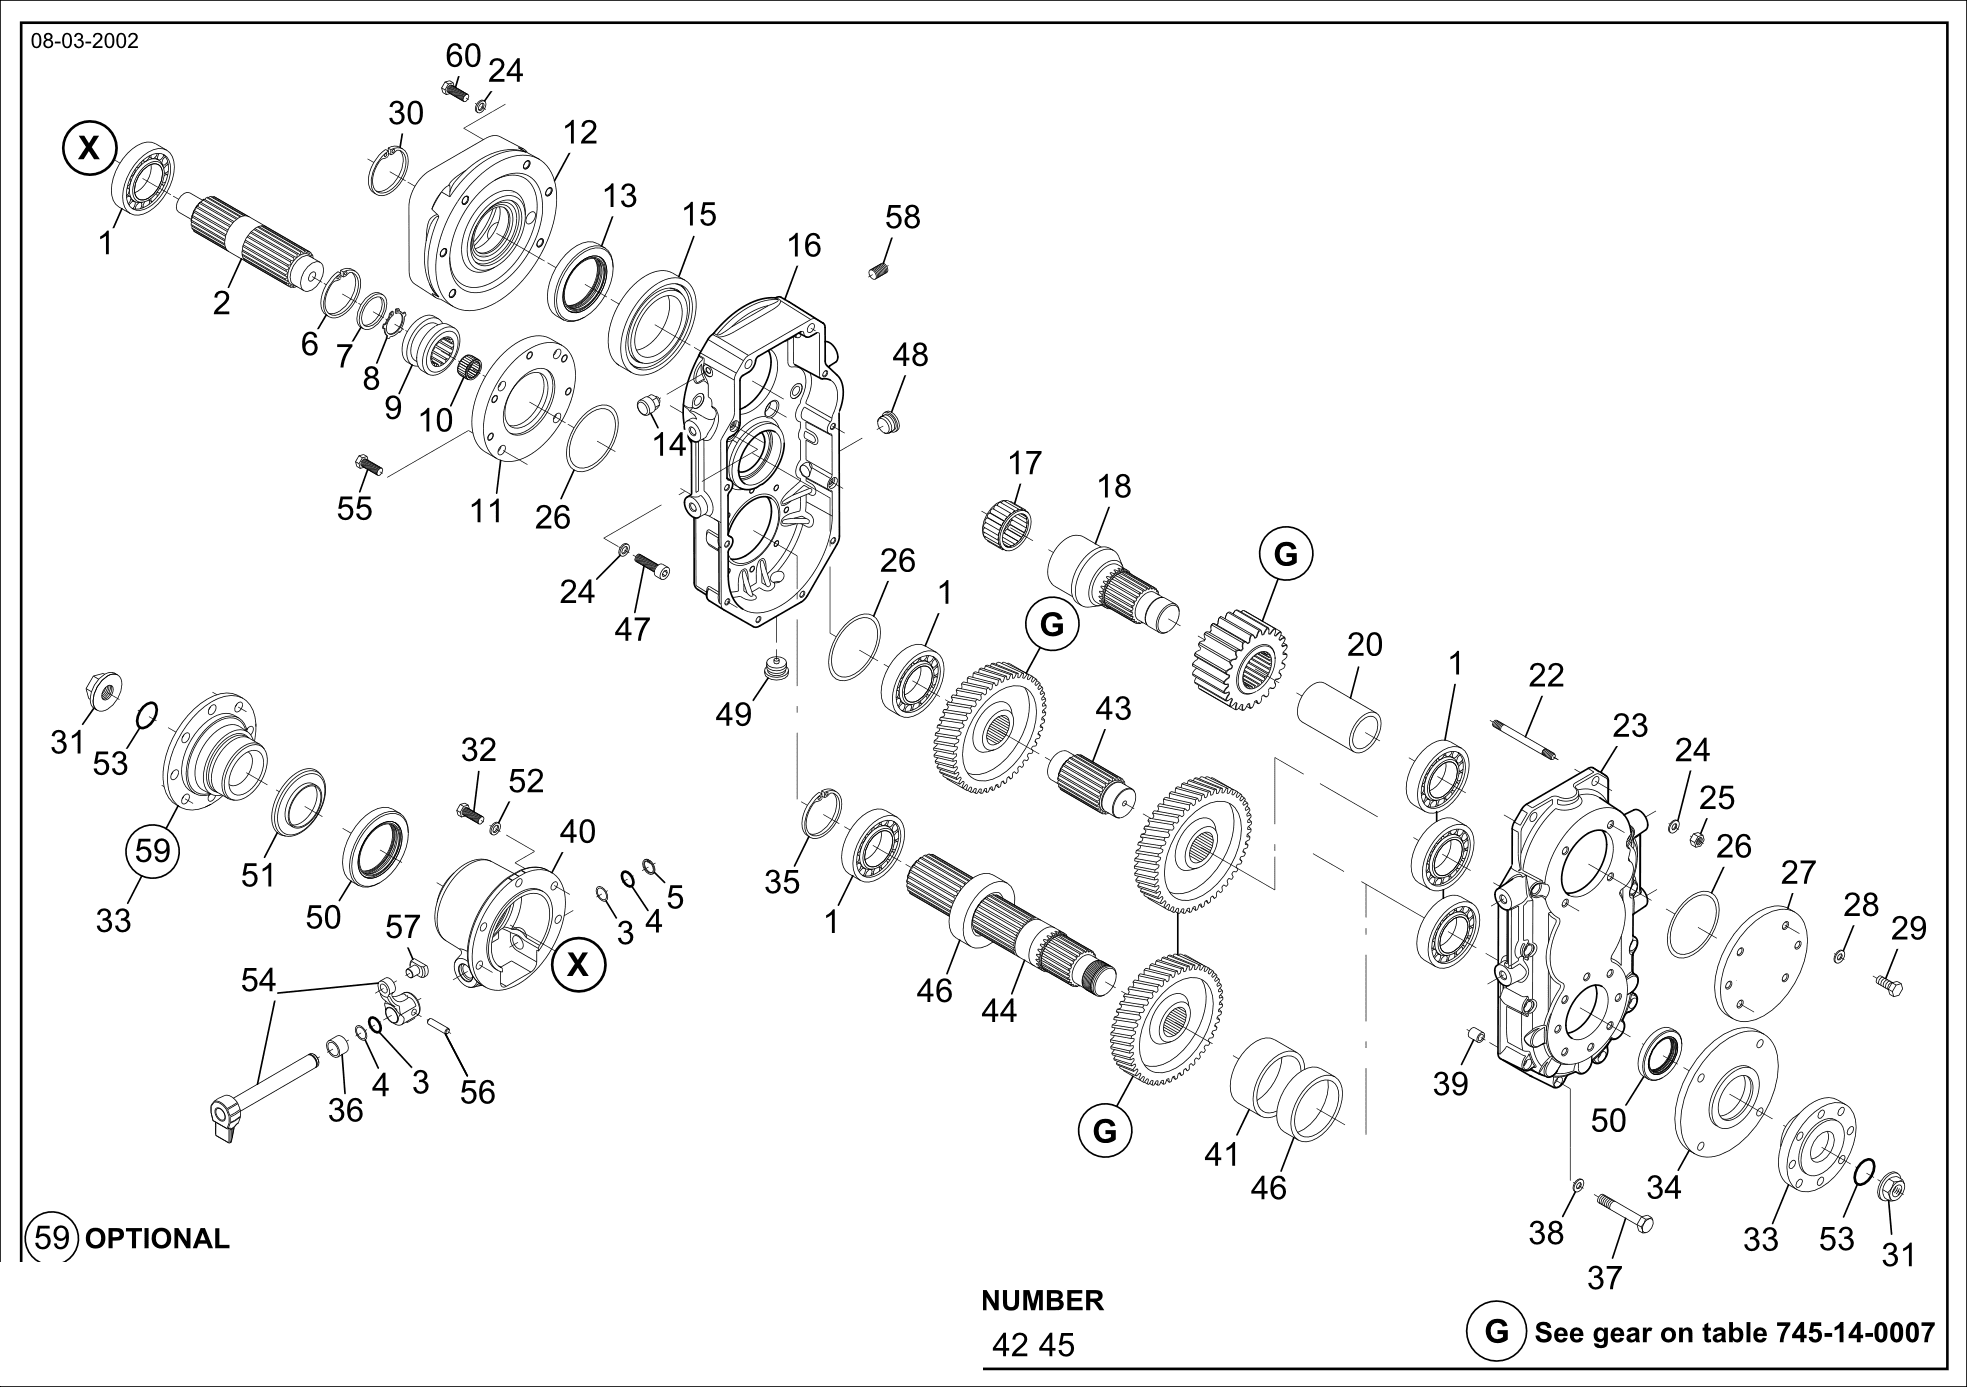 drawing for PAUS 513499 - BUSSOLA (figure 4)